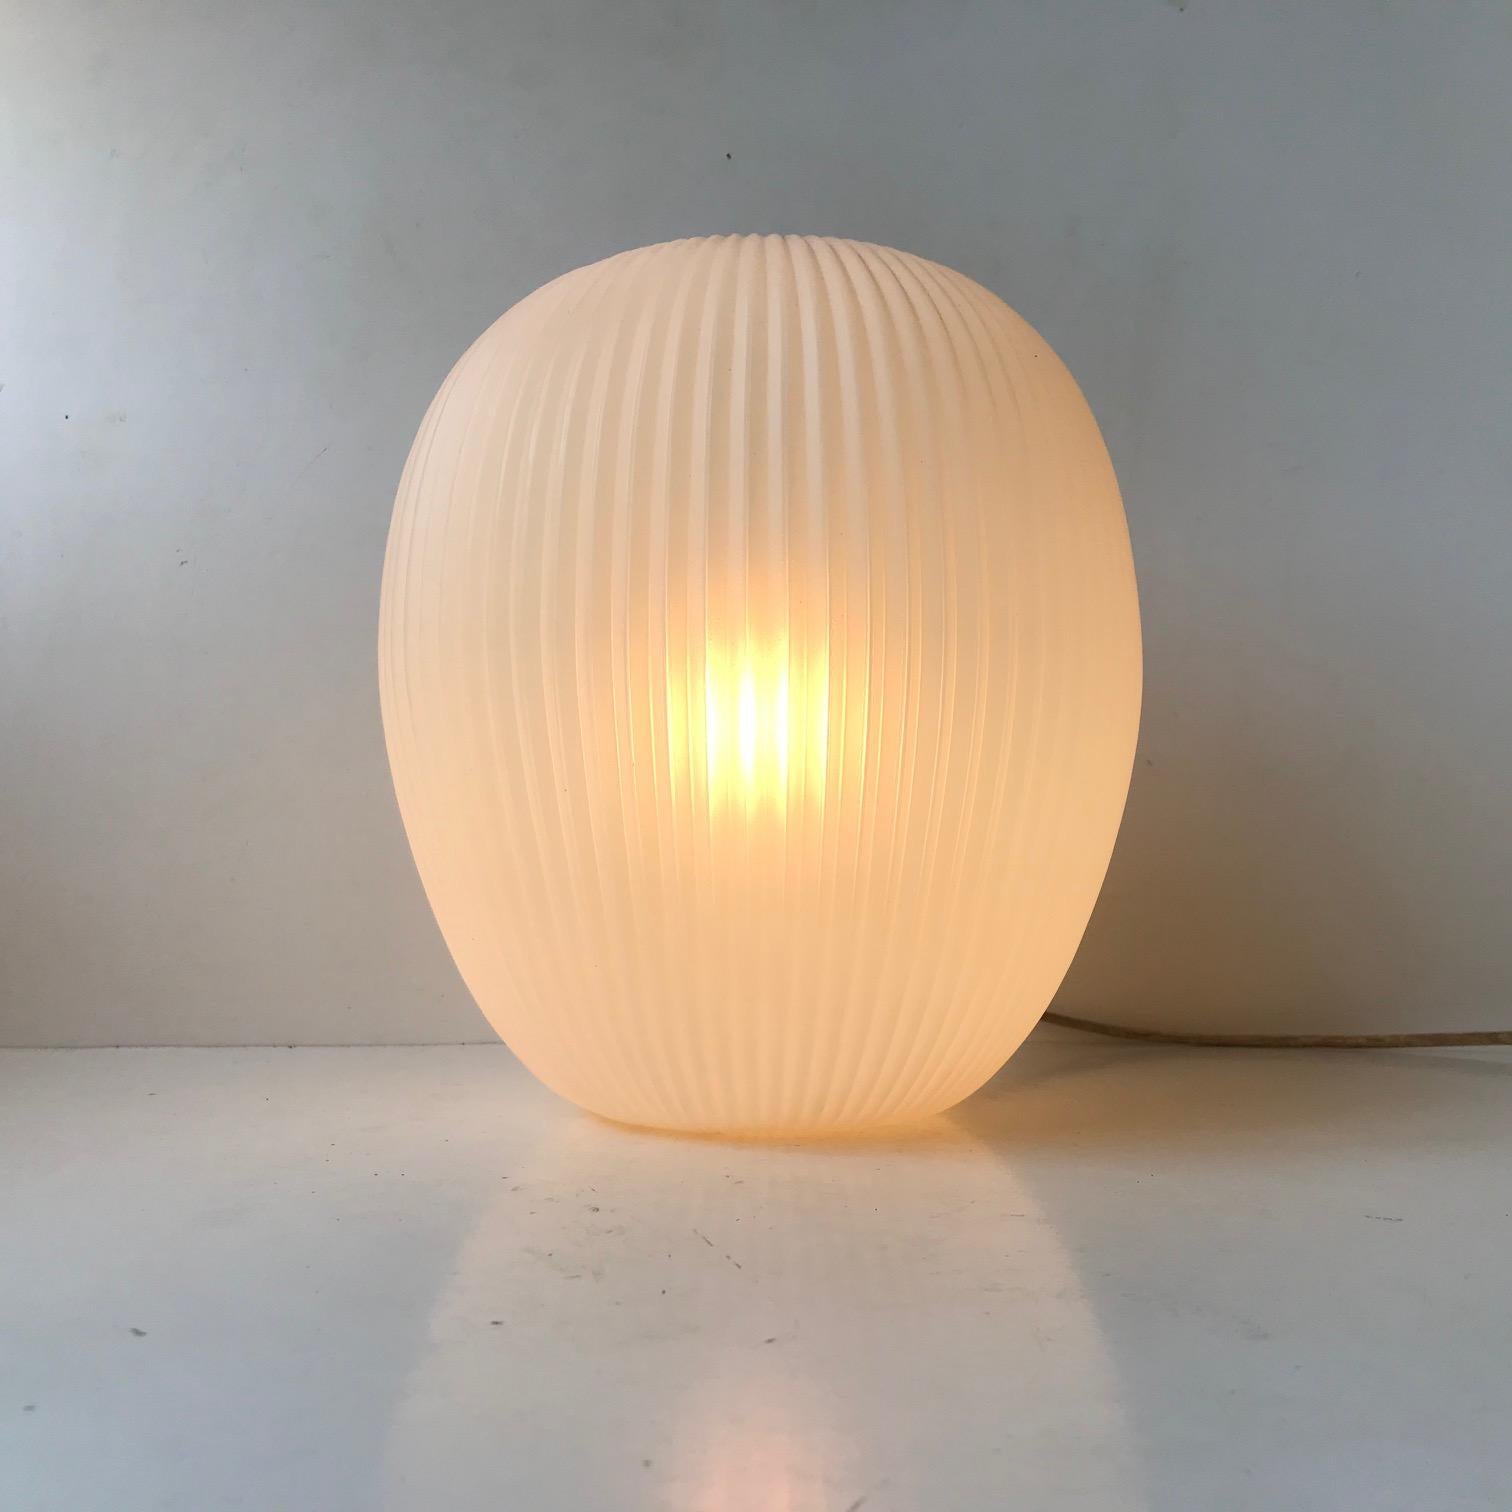 A rare vertically fluted white pendant lamp by Rotoflex. It has an ovoid shape perfectly balanced. Its is made from acrylic and is very light. Lightsource: E27 up to 250 Watts. Measurements: H: 28 cm, D: 25 cm.